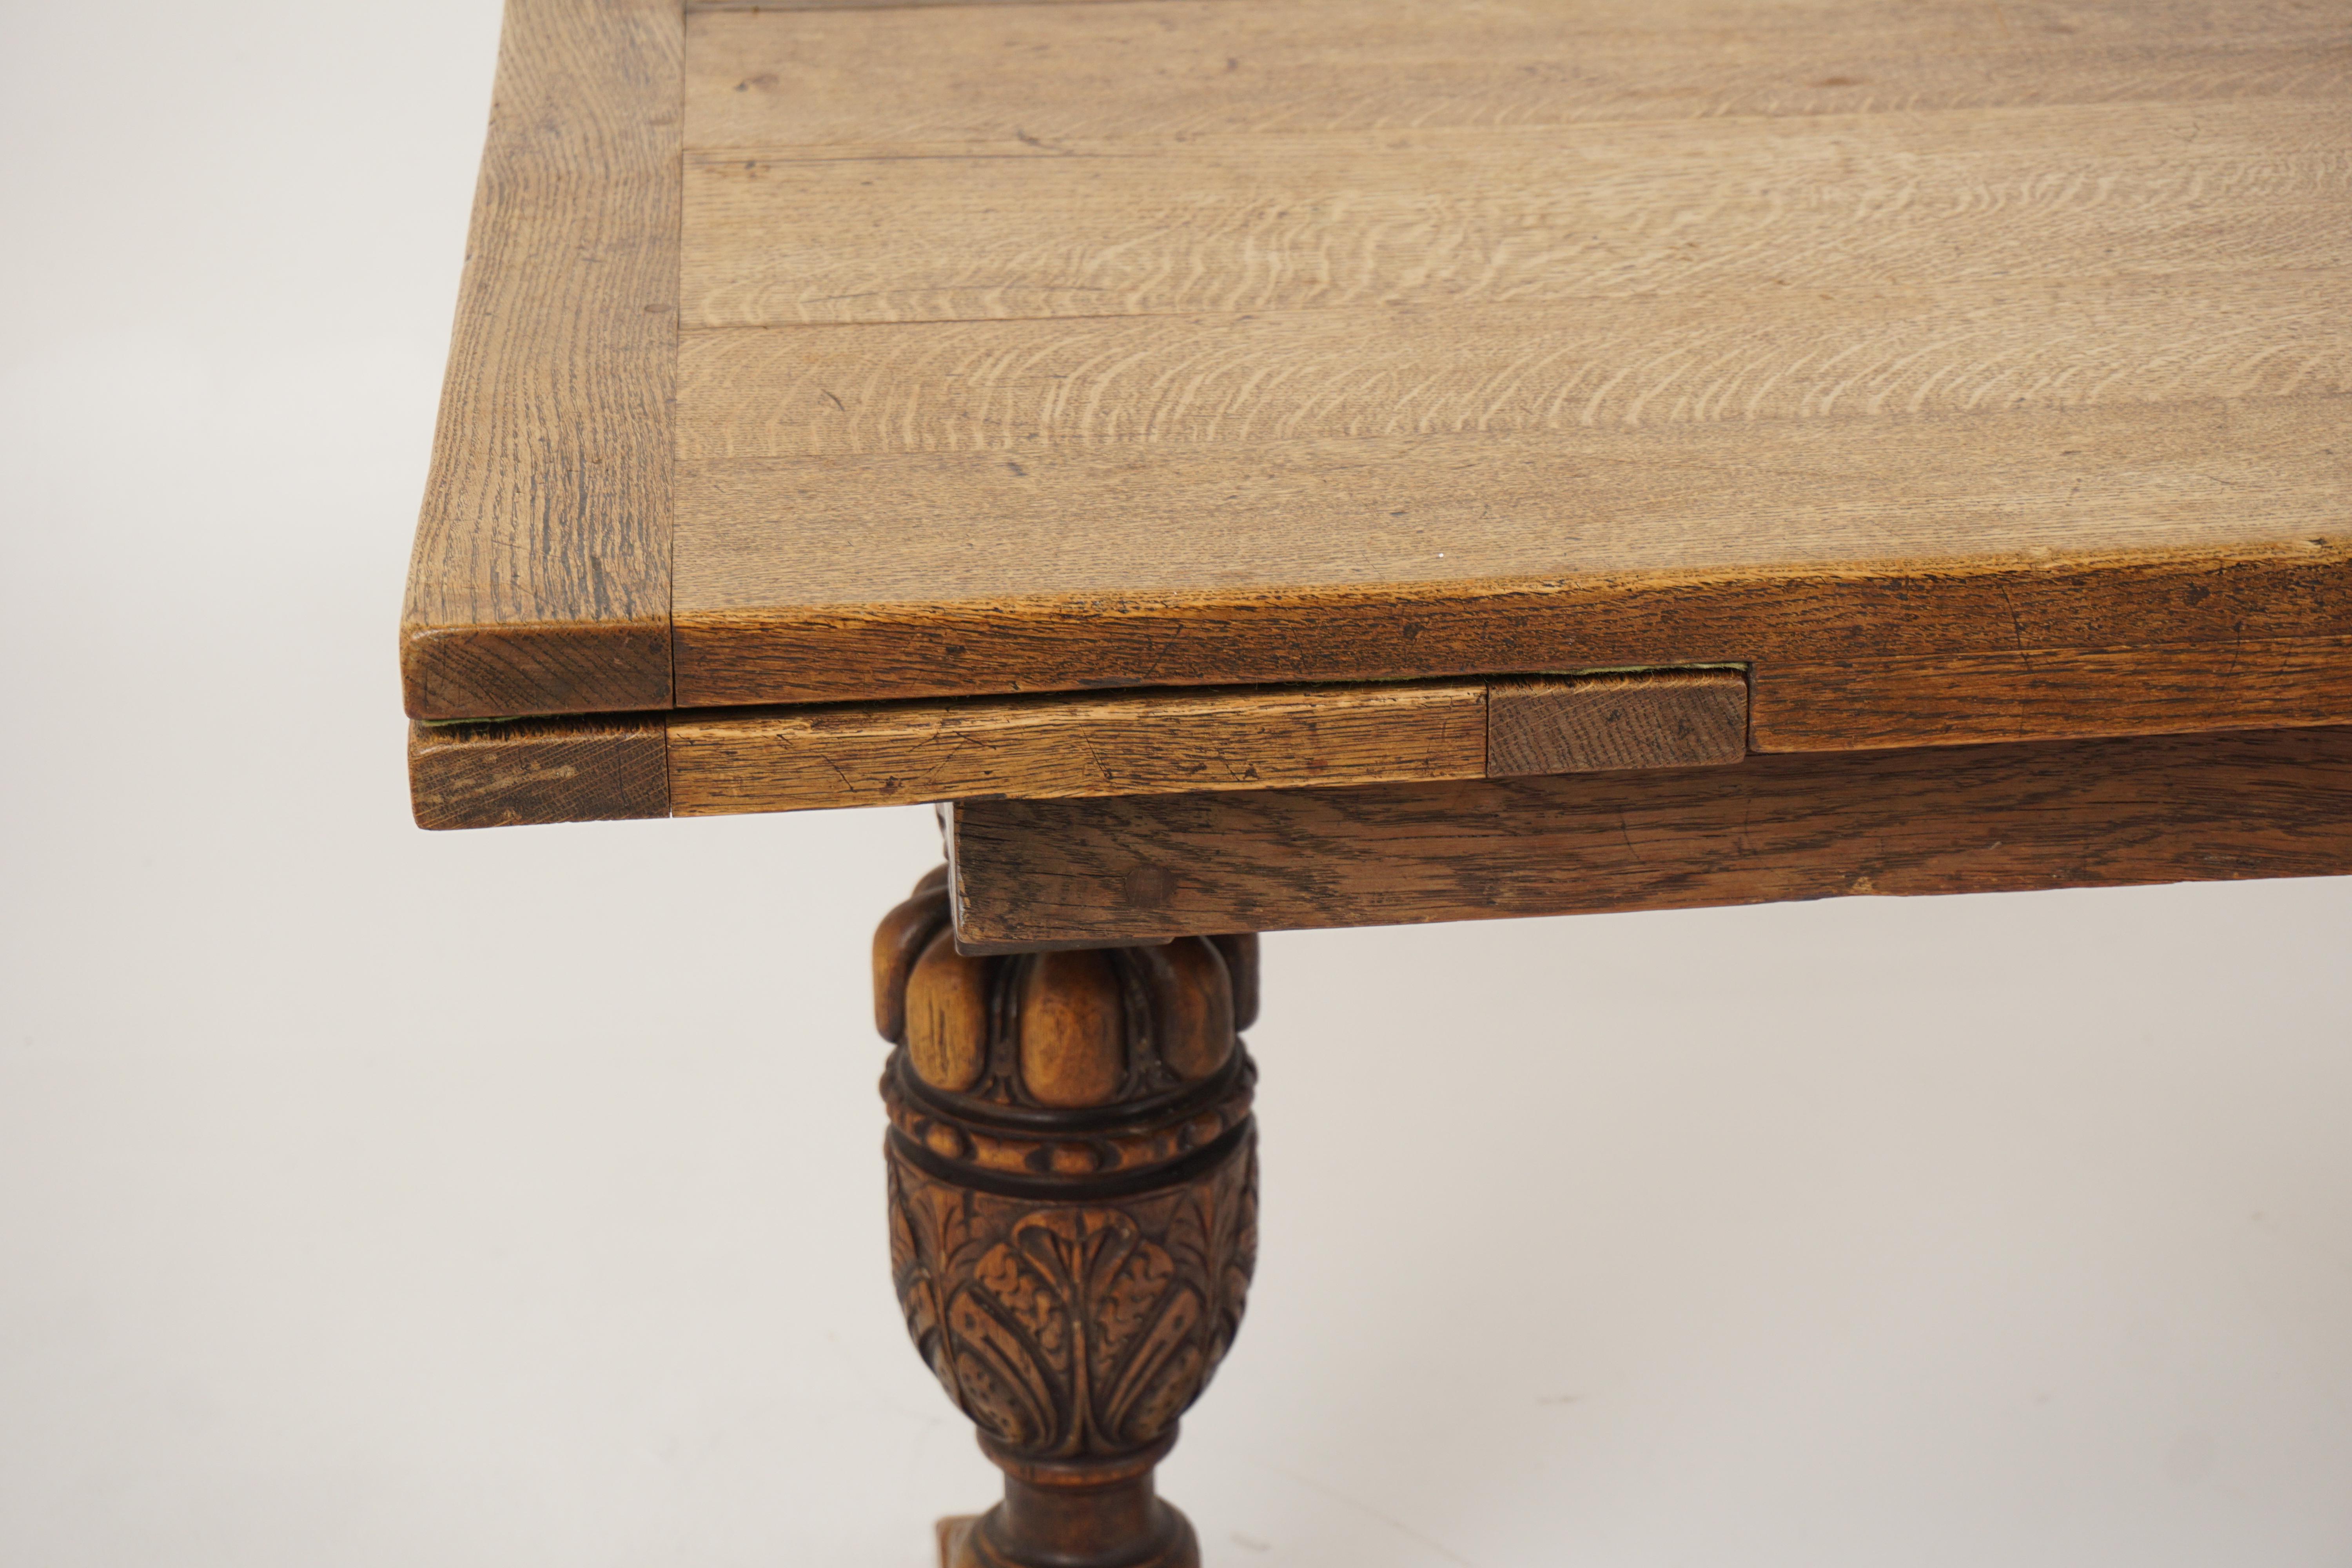 Scottish Antique Oak Dining Table with Leaves, Farmhouse Table, Scotland 1910, B2592